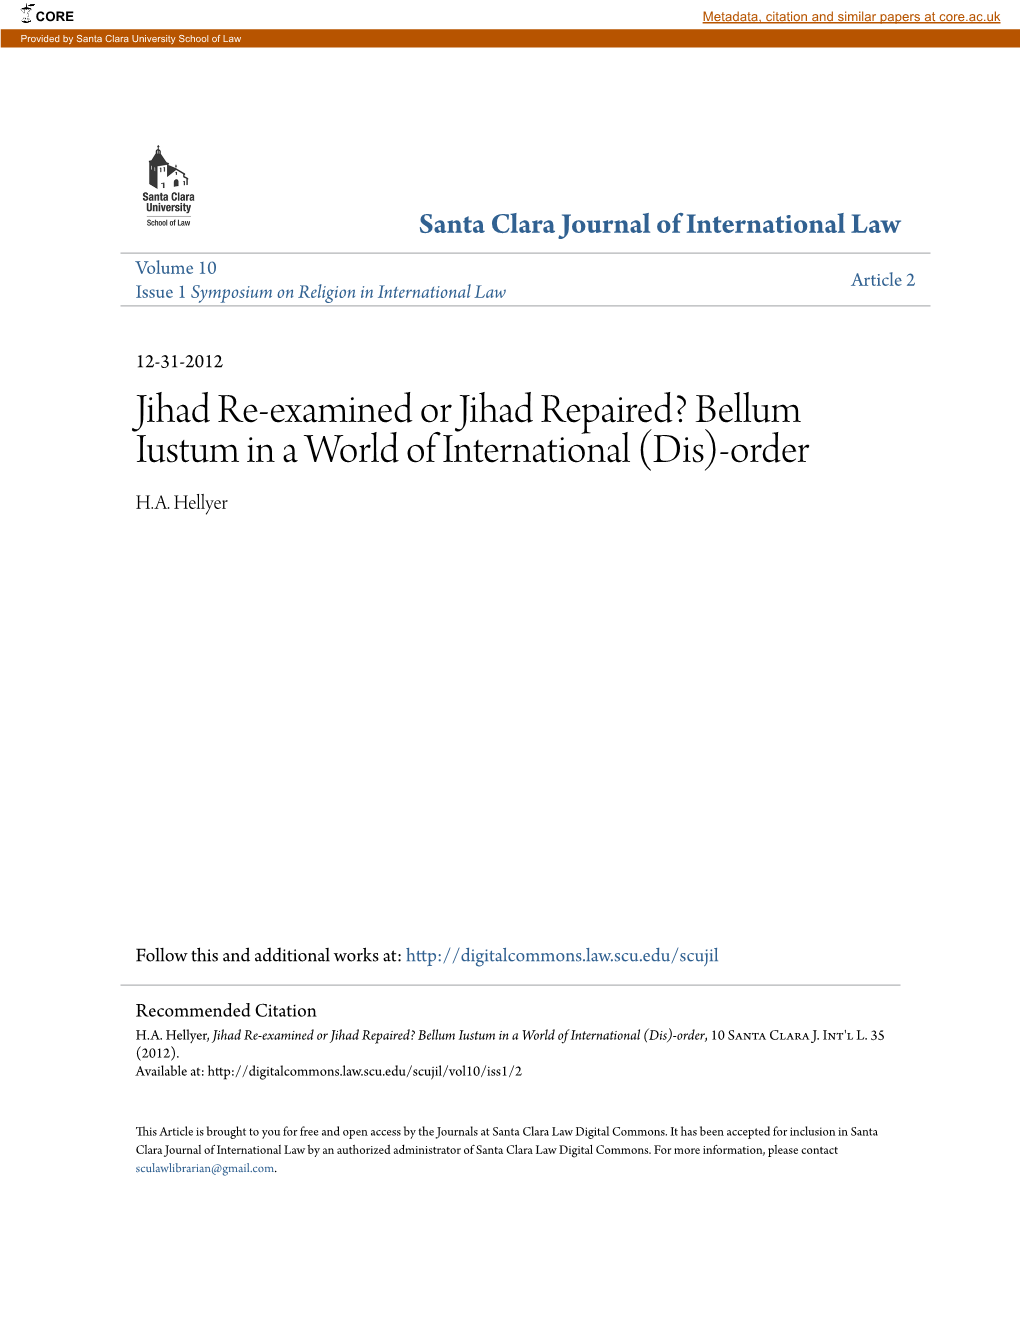 Jihad Re-Examined Or Jihad Repaired? Bellum Iustum in a World of International (Dis)-Order H.A